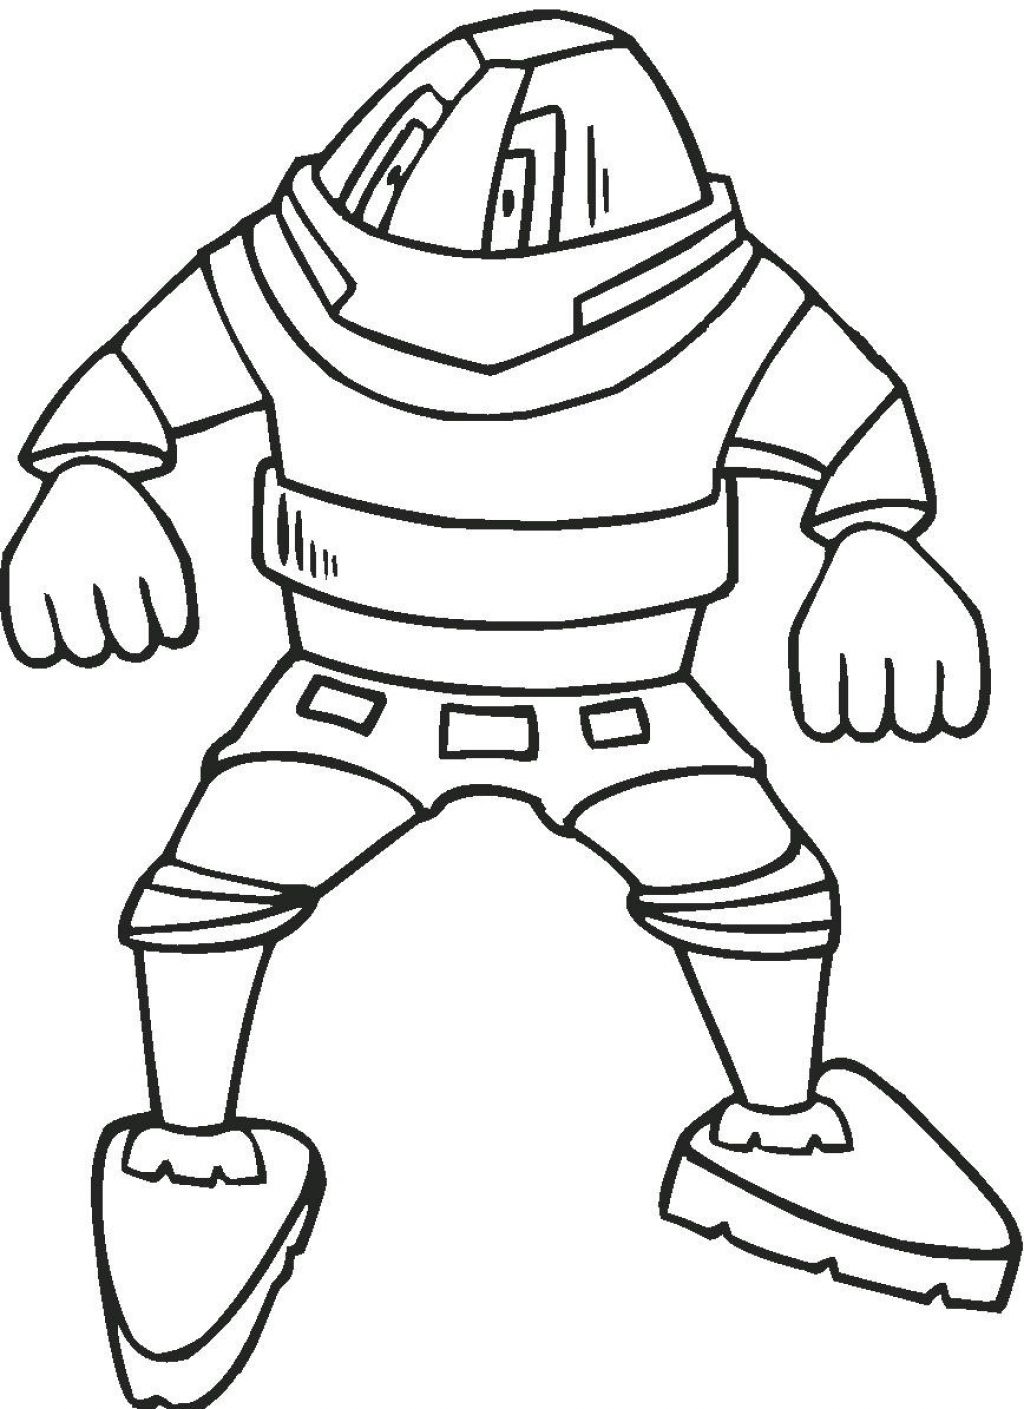 Download Free Printable Robot Coloring Pages For Kids